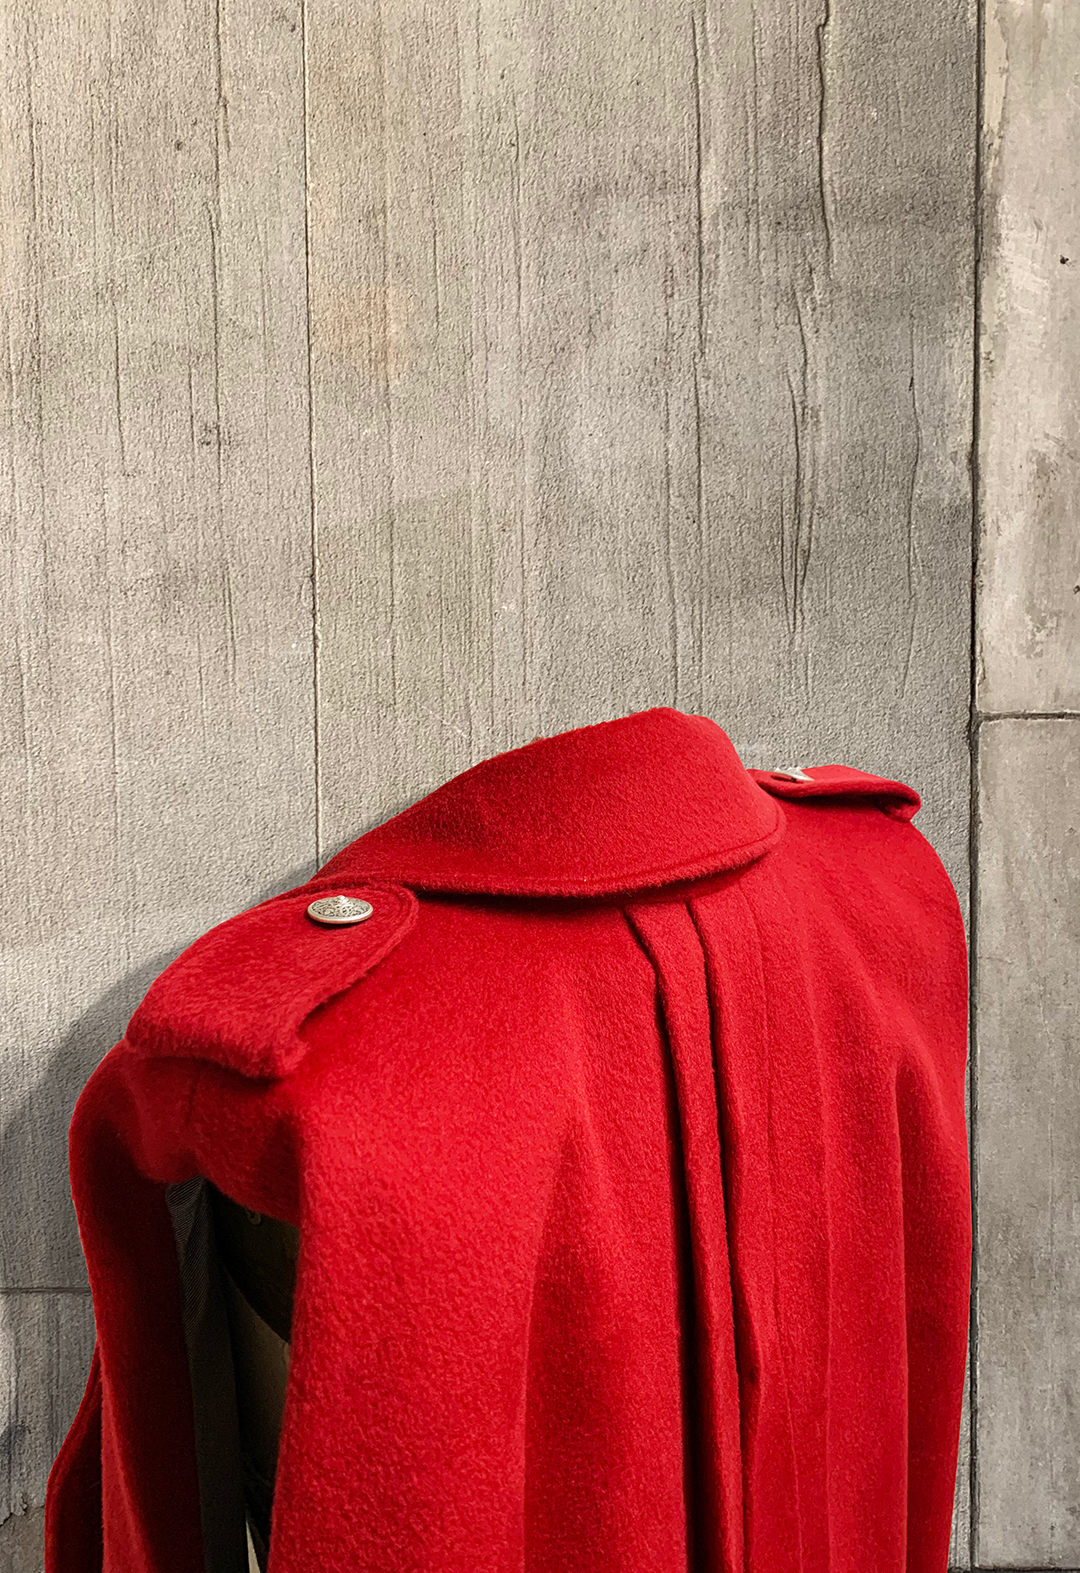 This is the back of a red wool vest. There are two metal buttons on top of the stripes on the shoulder. The background is a concrete wall.